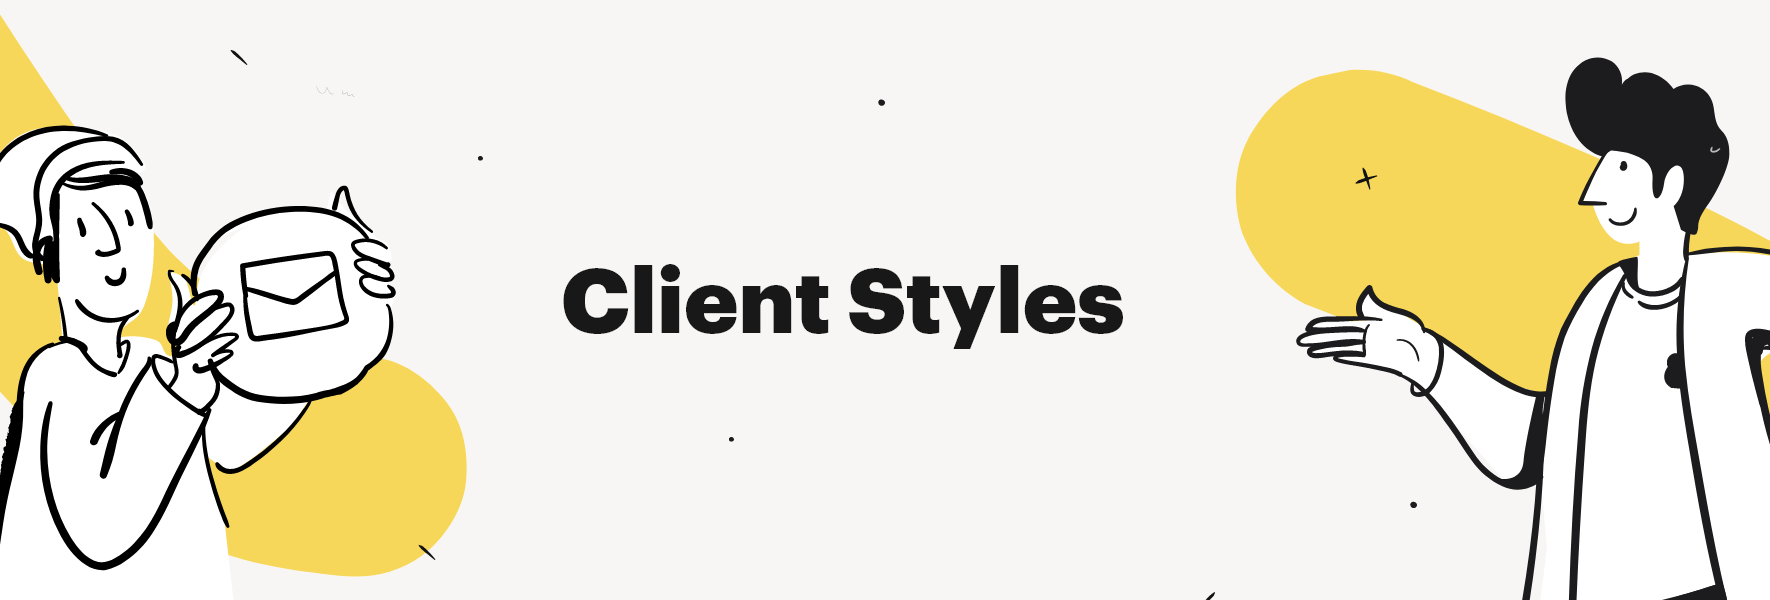 Client Styles